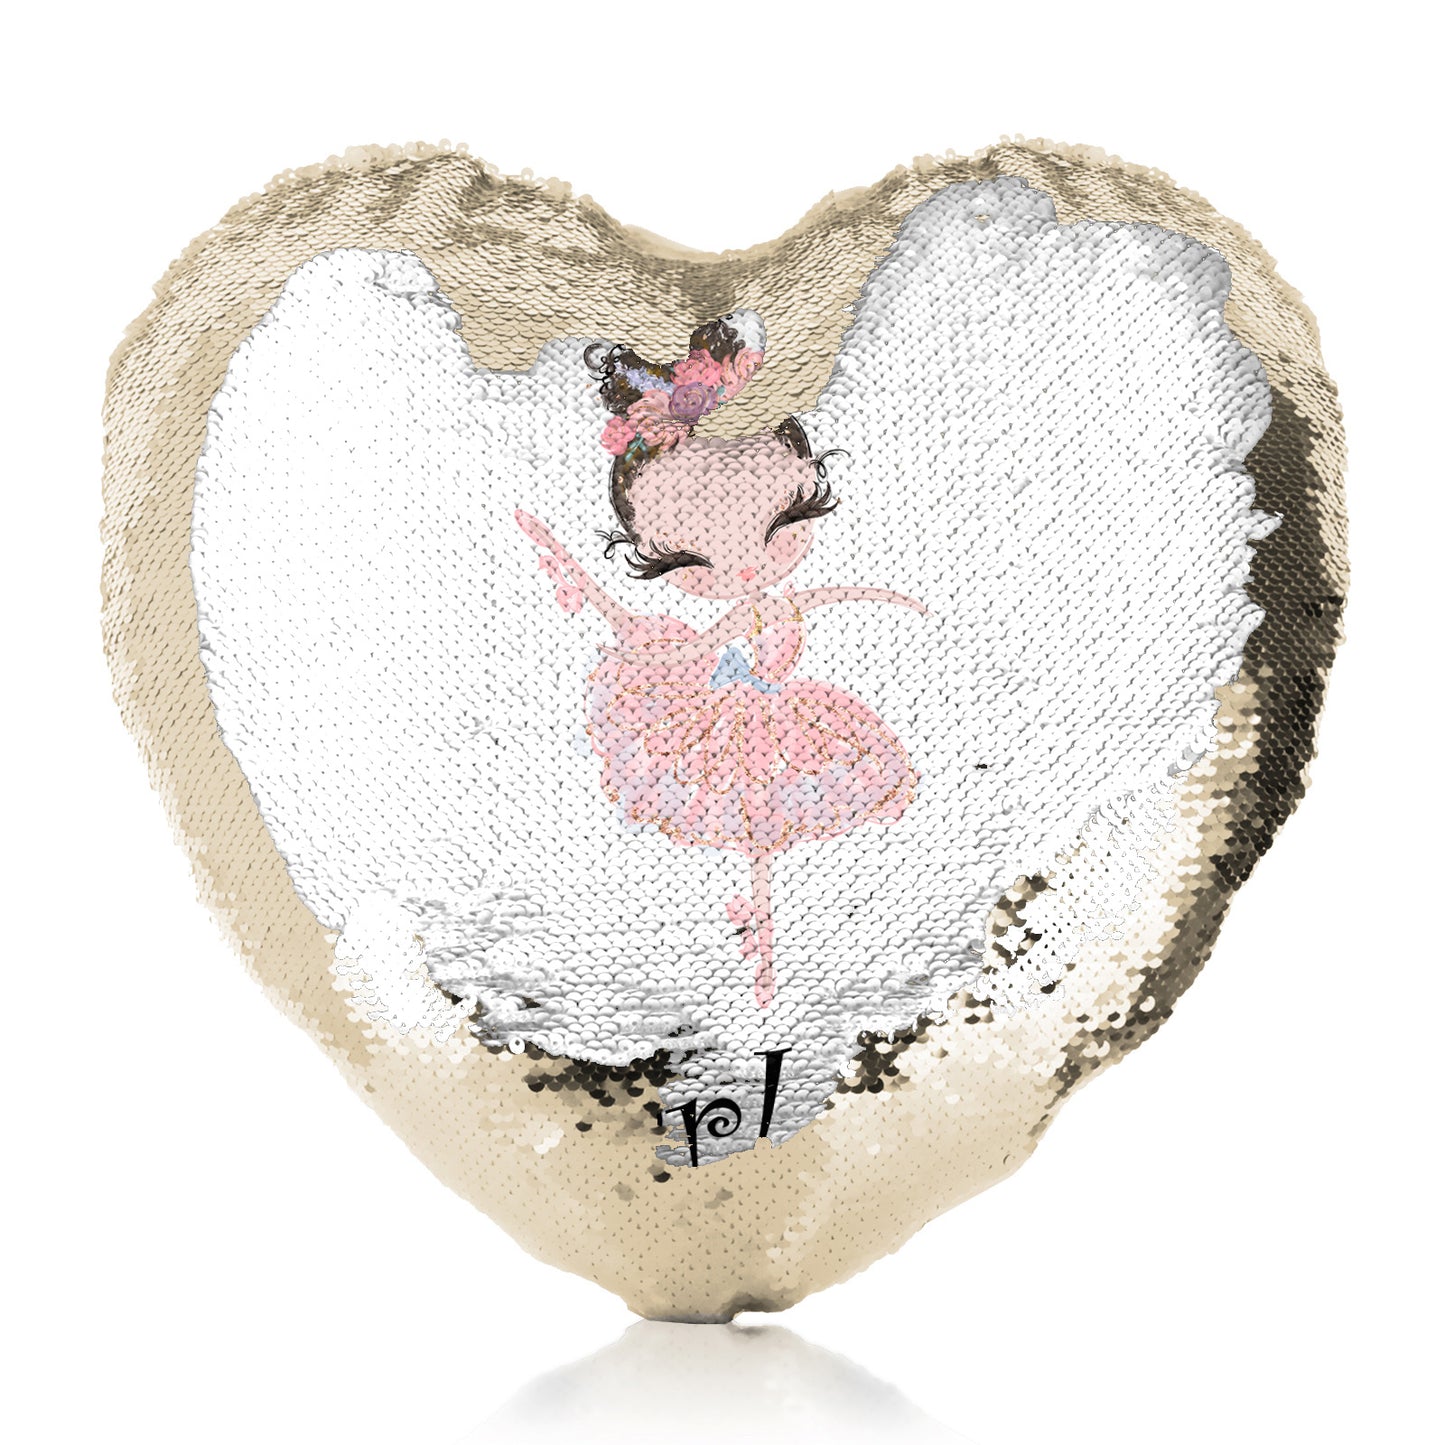 Personalised Sequin Heart Cushion with Cute Text and Brown Hair Pink Dress Ballerina